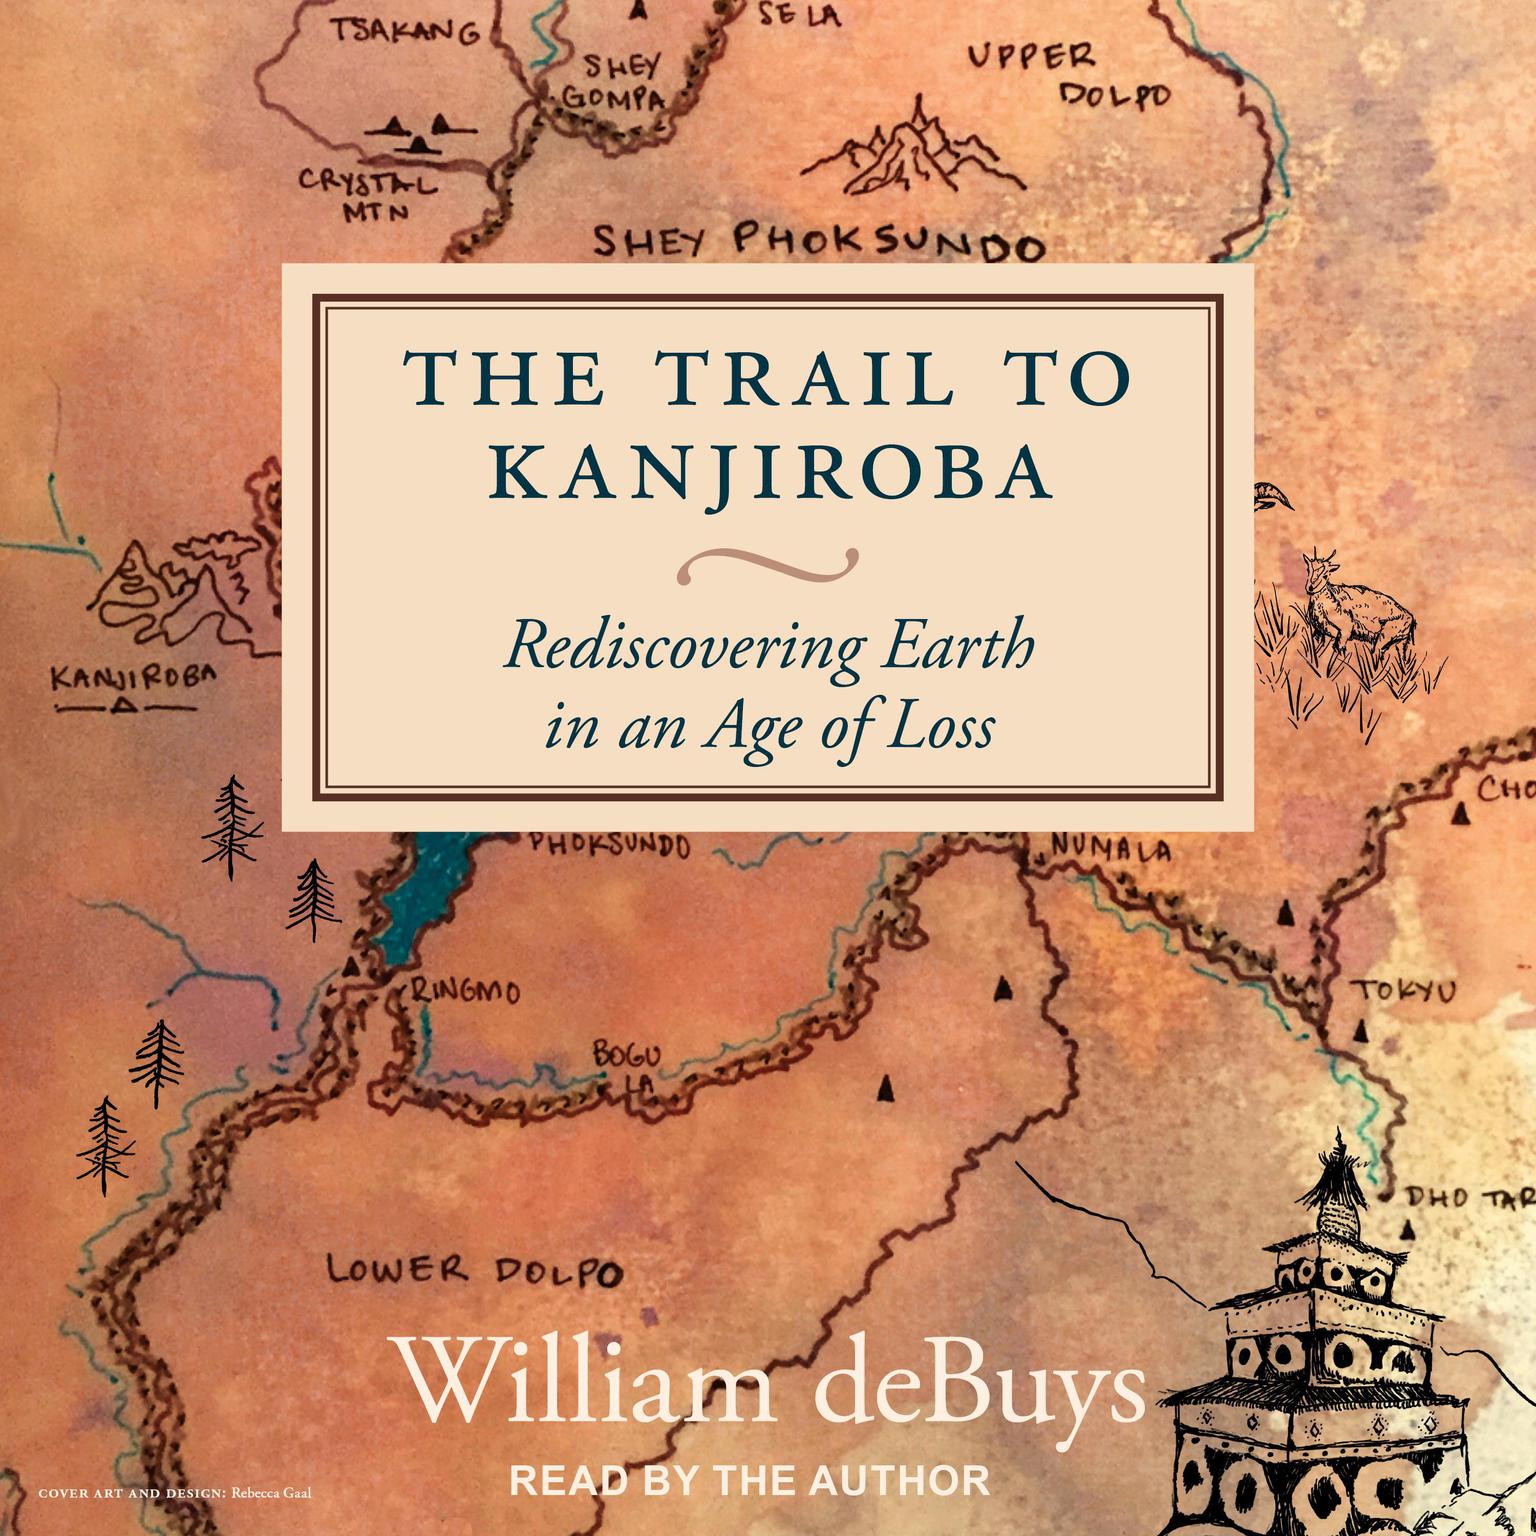 The Trail to Kanjiroba: Rediscovering Earth in an Age of Loss Audiobook, by William deBuys